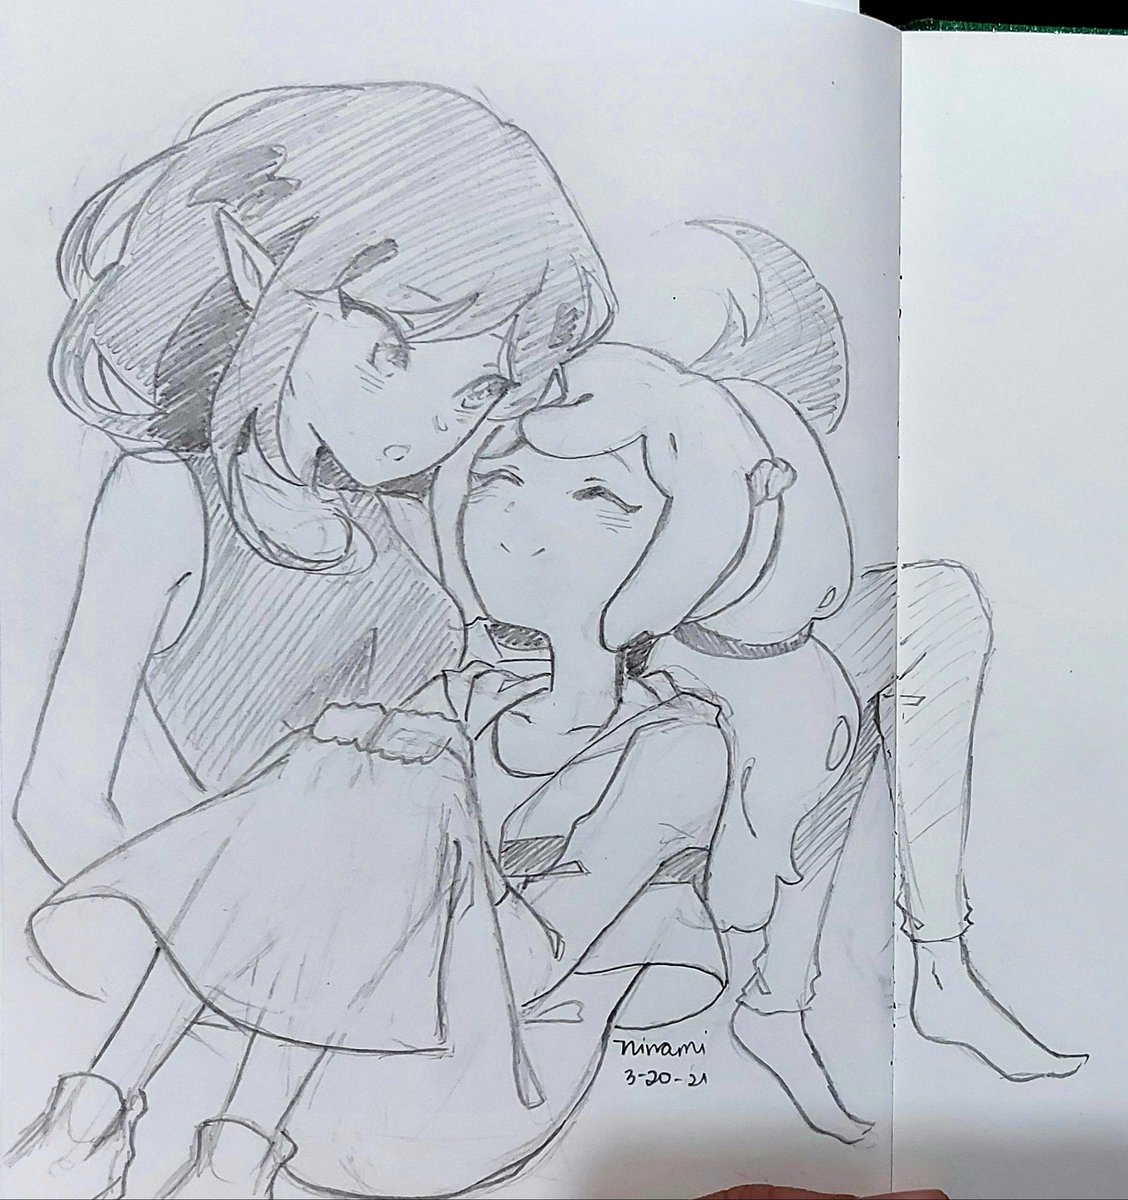 A sketch of marceline and bubblegum 💕

I only ever watched adventure time for simon hahahaha. But these too are so cute uwu

(I have failed anatomy xD but i'll prolly color this on digital so i can fix it up a bit)

#AdventureTime #bubbline #marceline #princessbubblegum #fanart 